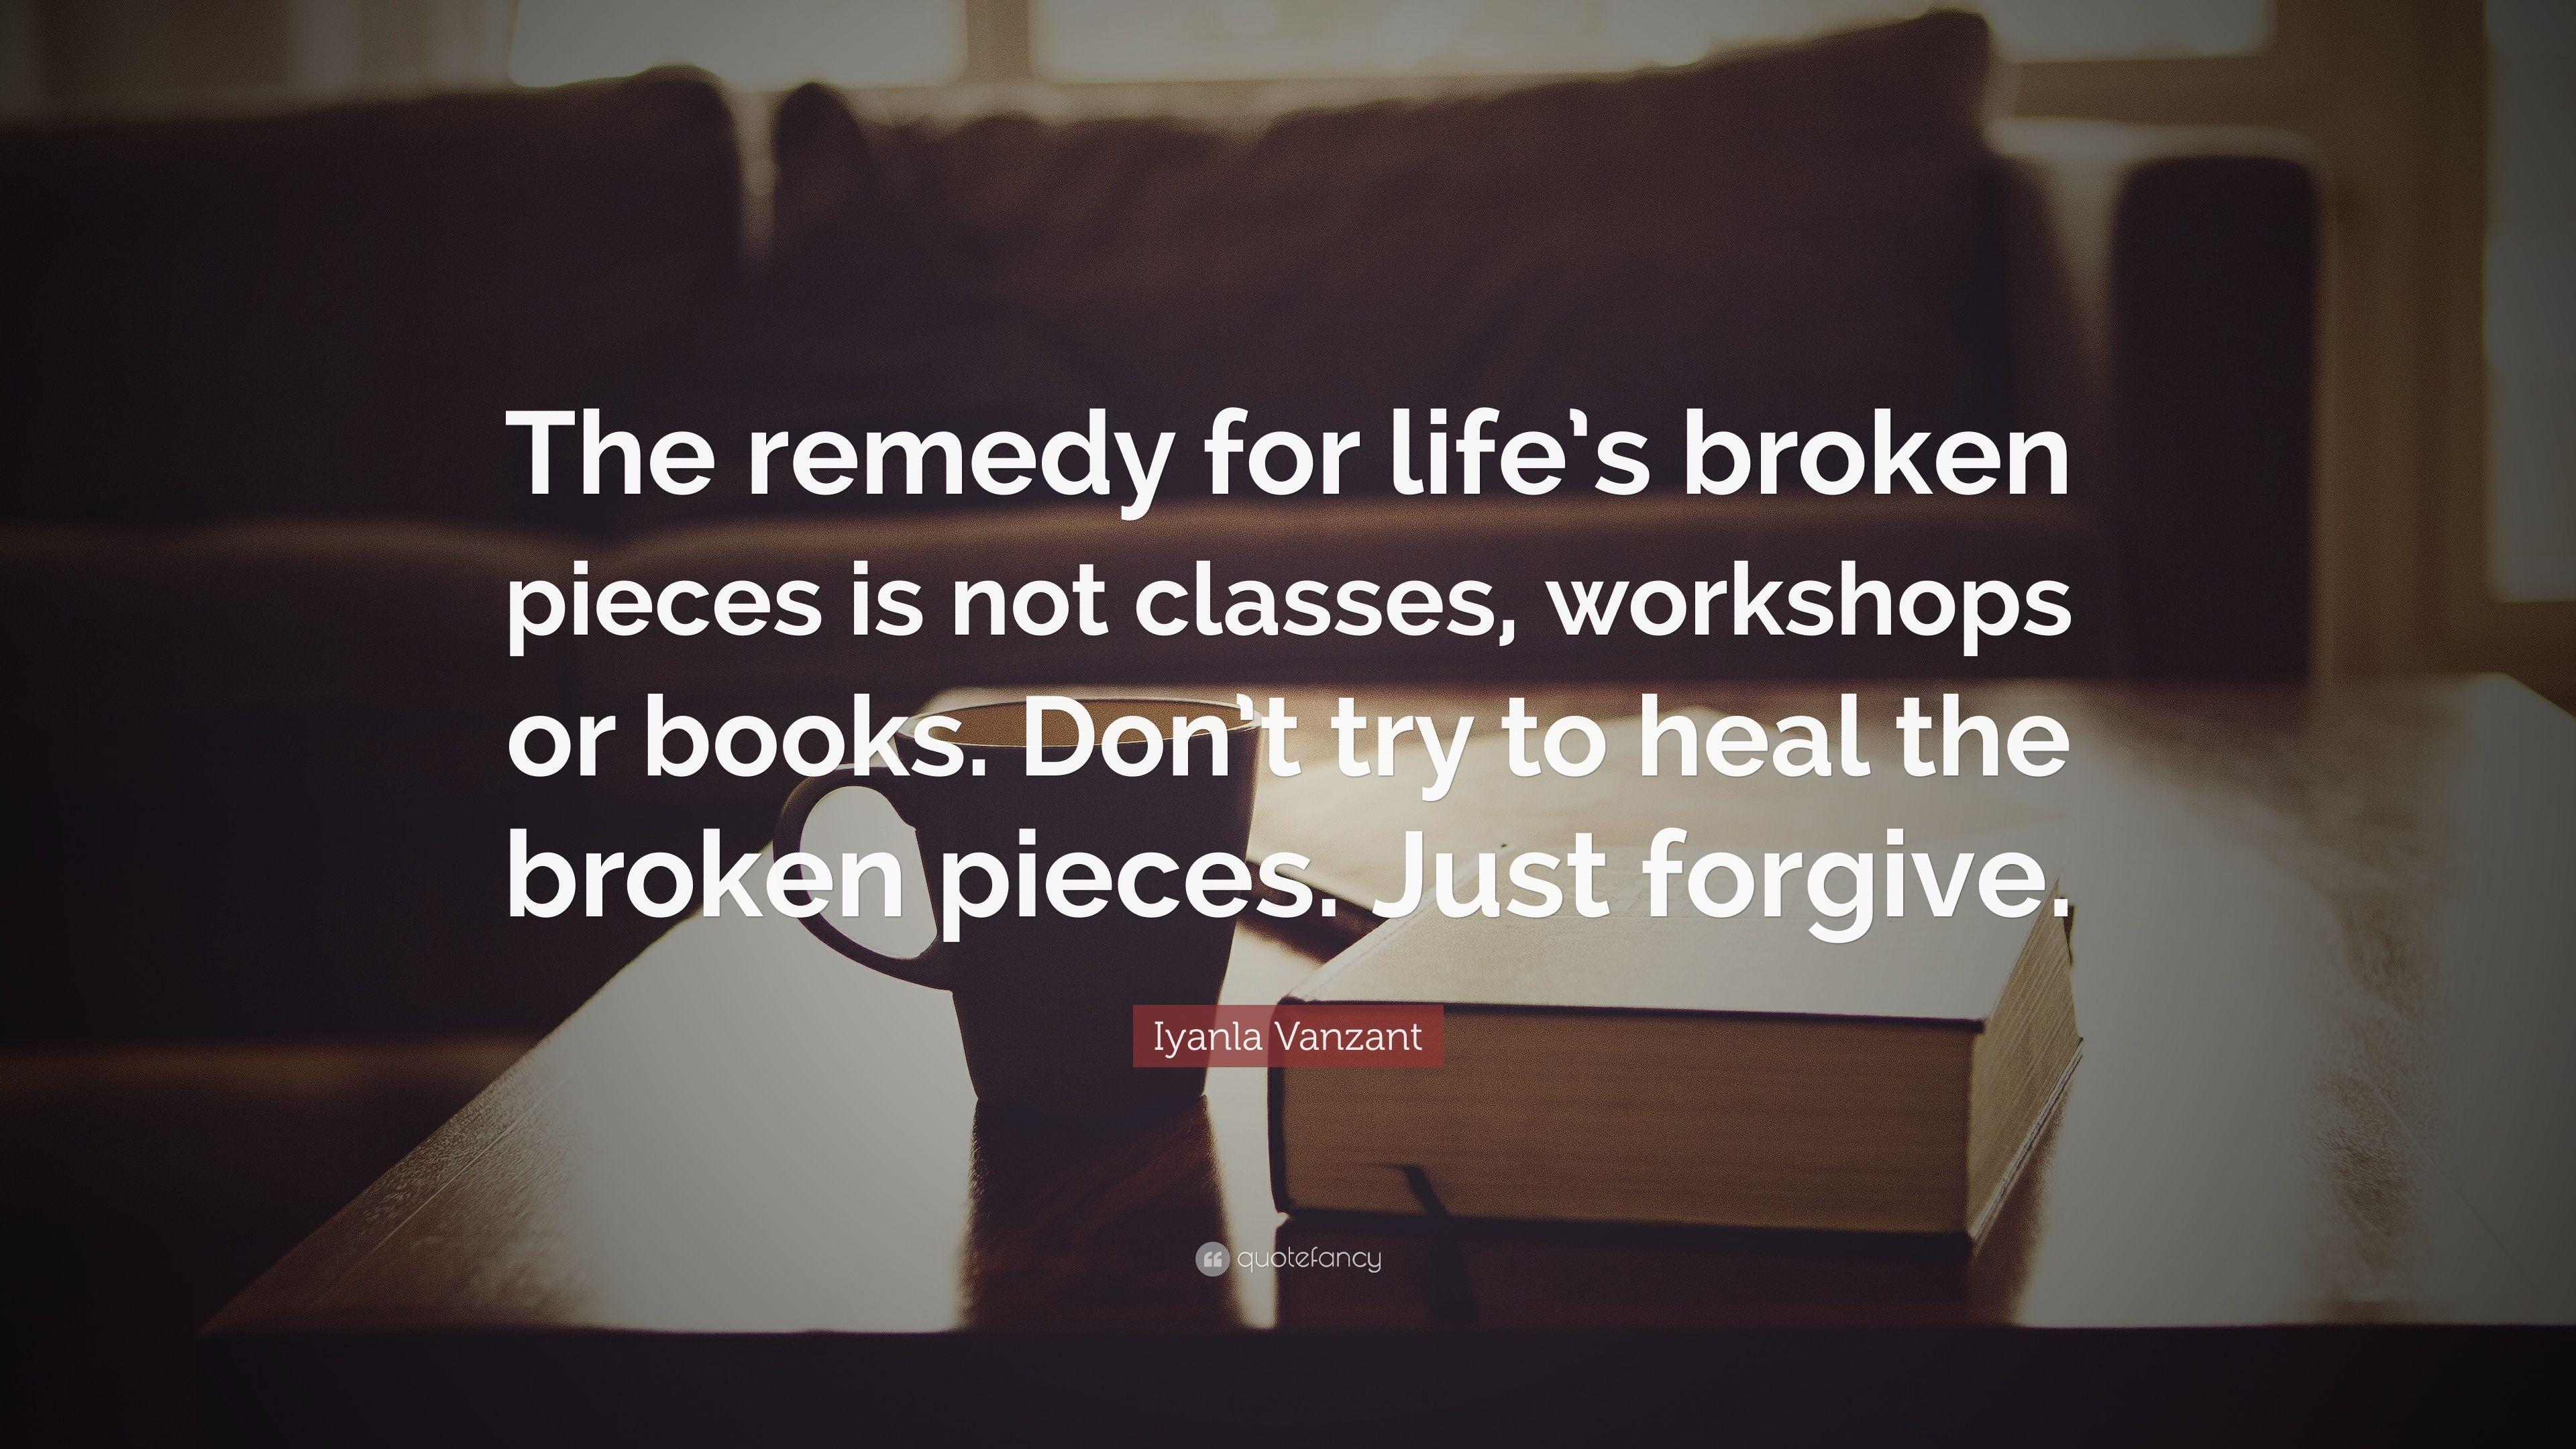 Iyanla Vanzant Quote: “The remedy for life's broken pieces is not